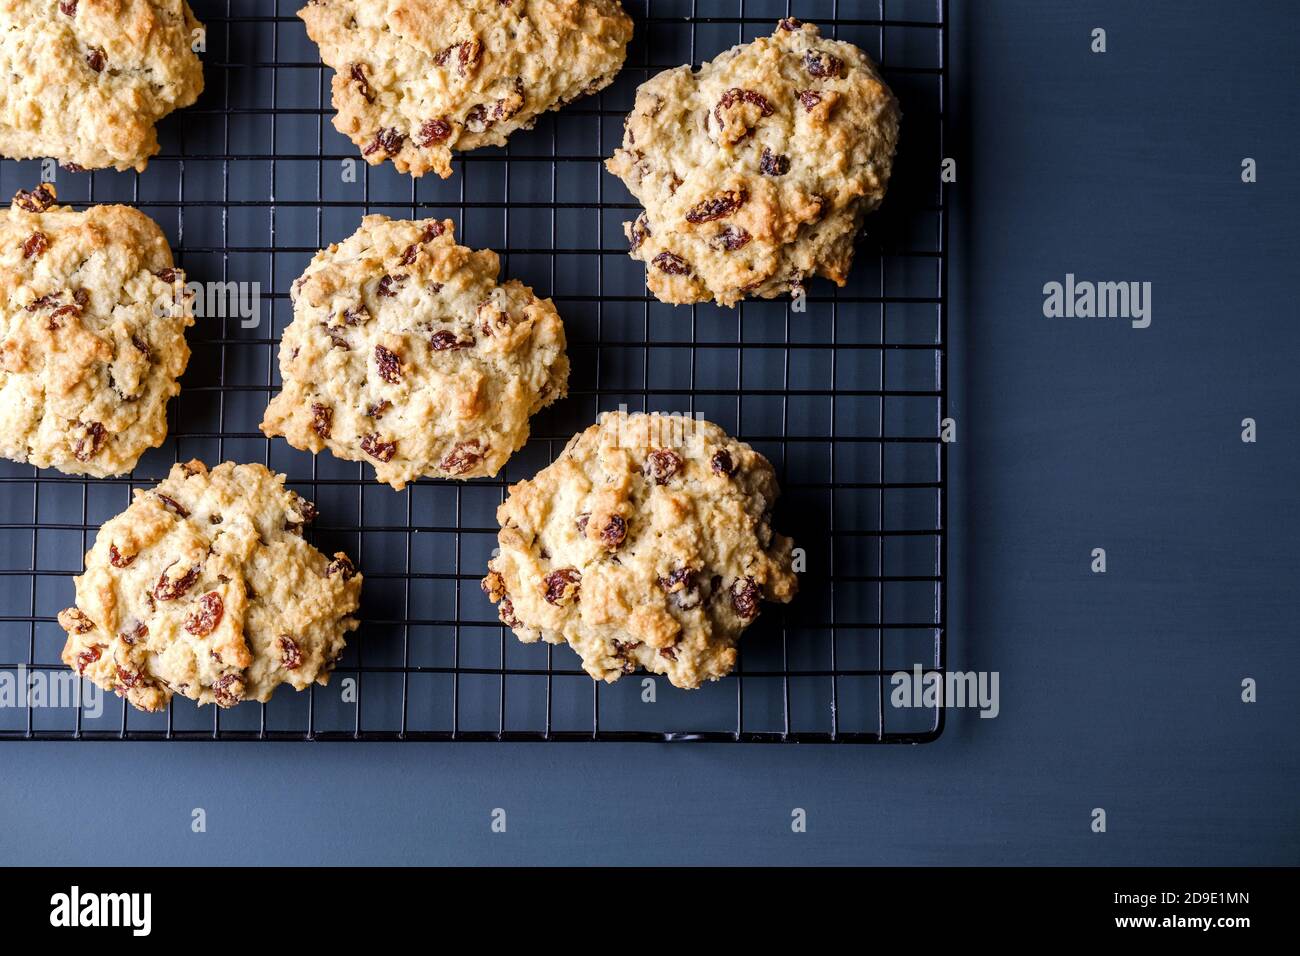 A freshly home baked batch of Rock Cakes, or Rock Buns, on a cooling rack. The tasty looking cakes are filled with Sultanas and Raisins Stock Photo